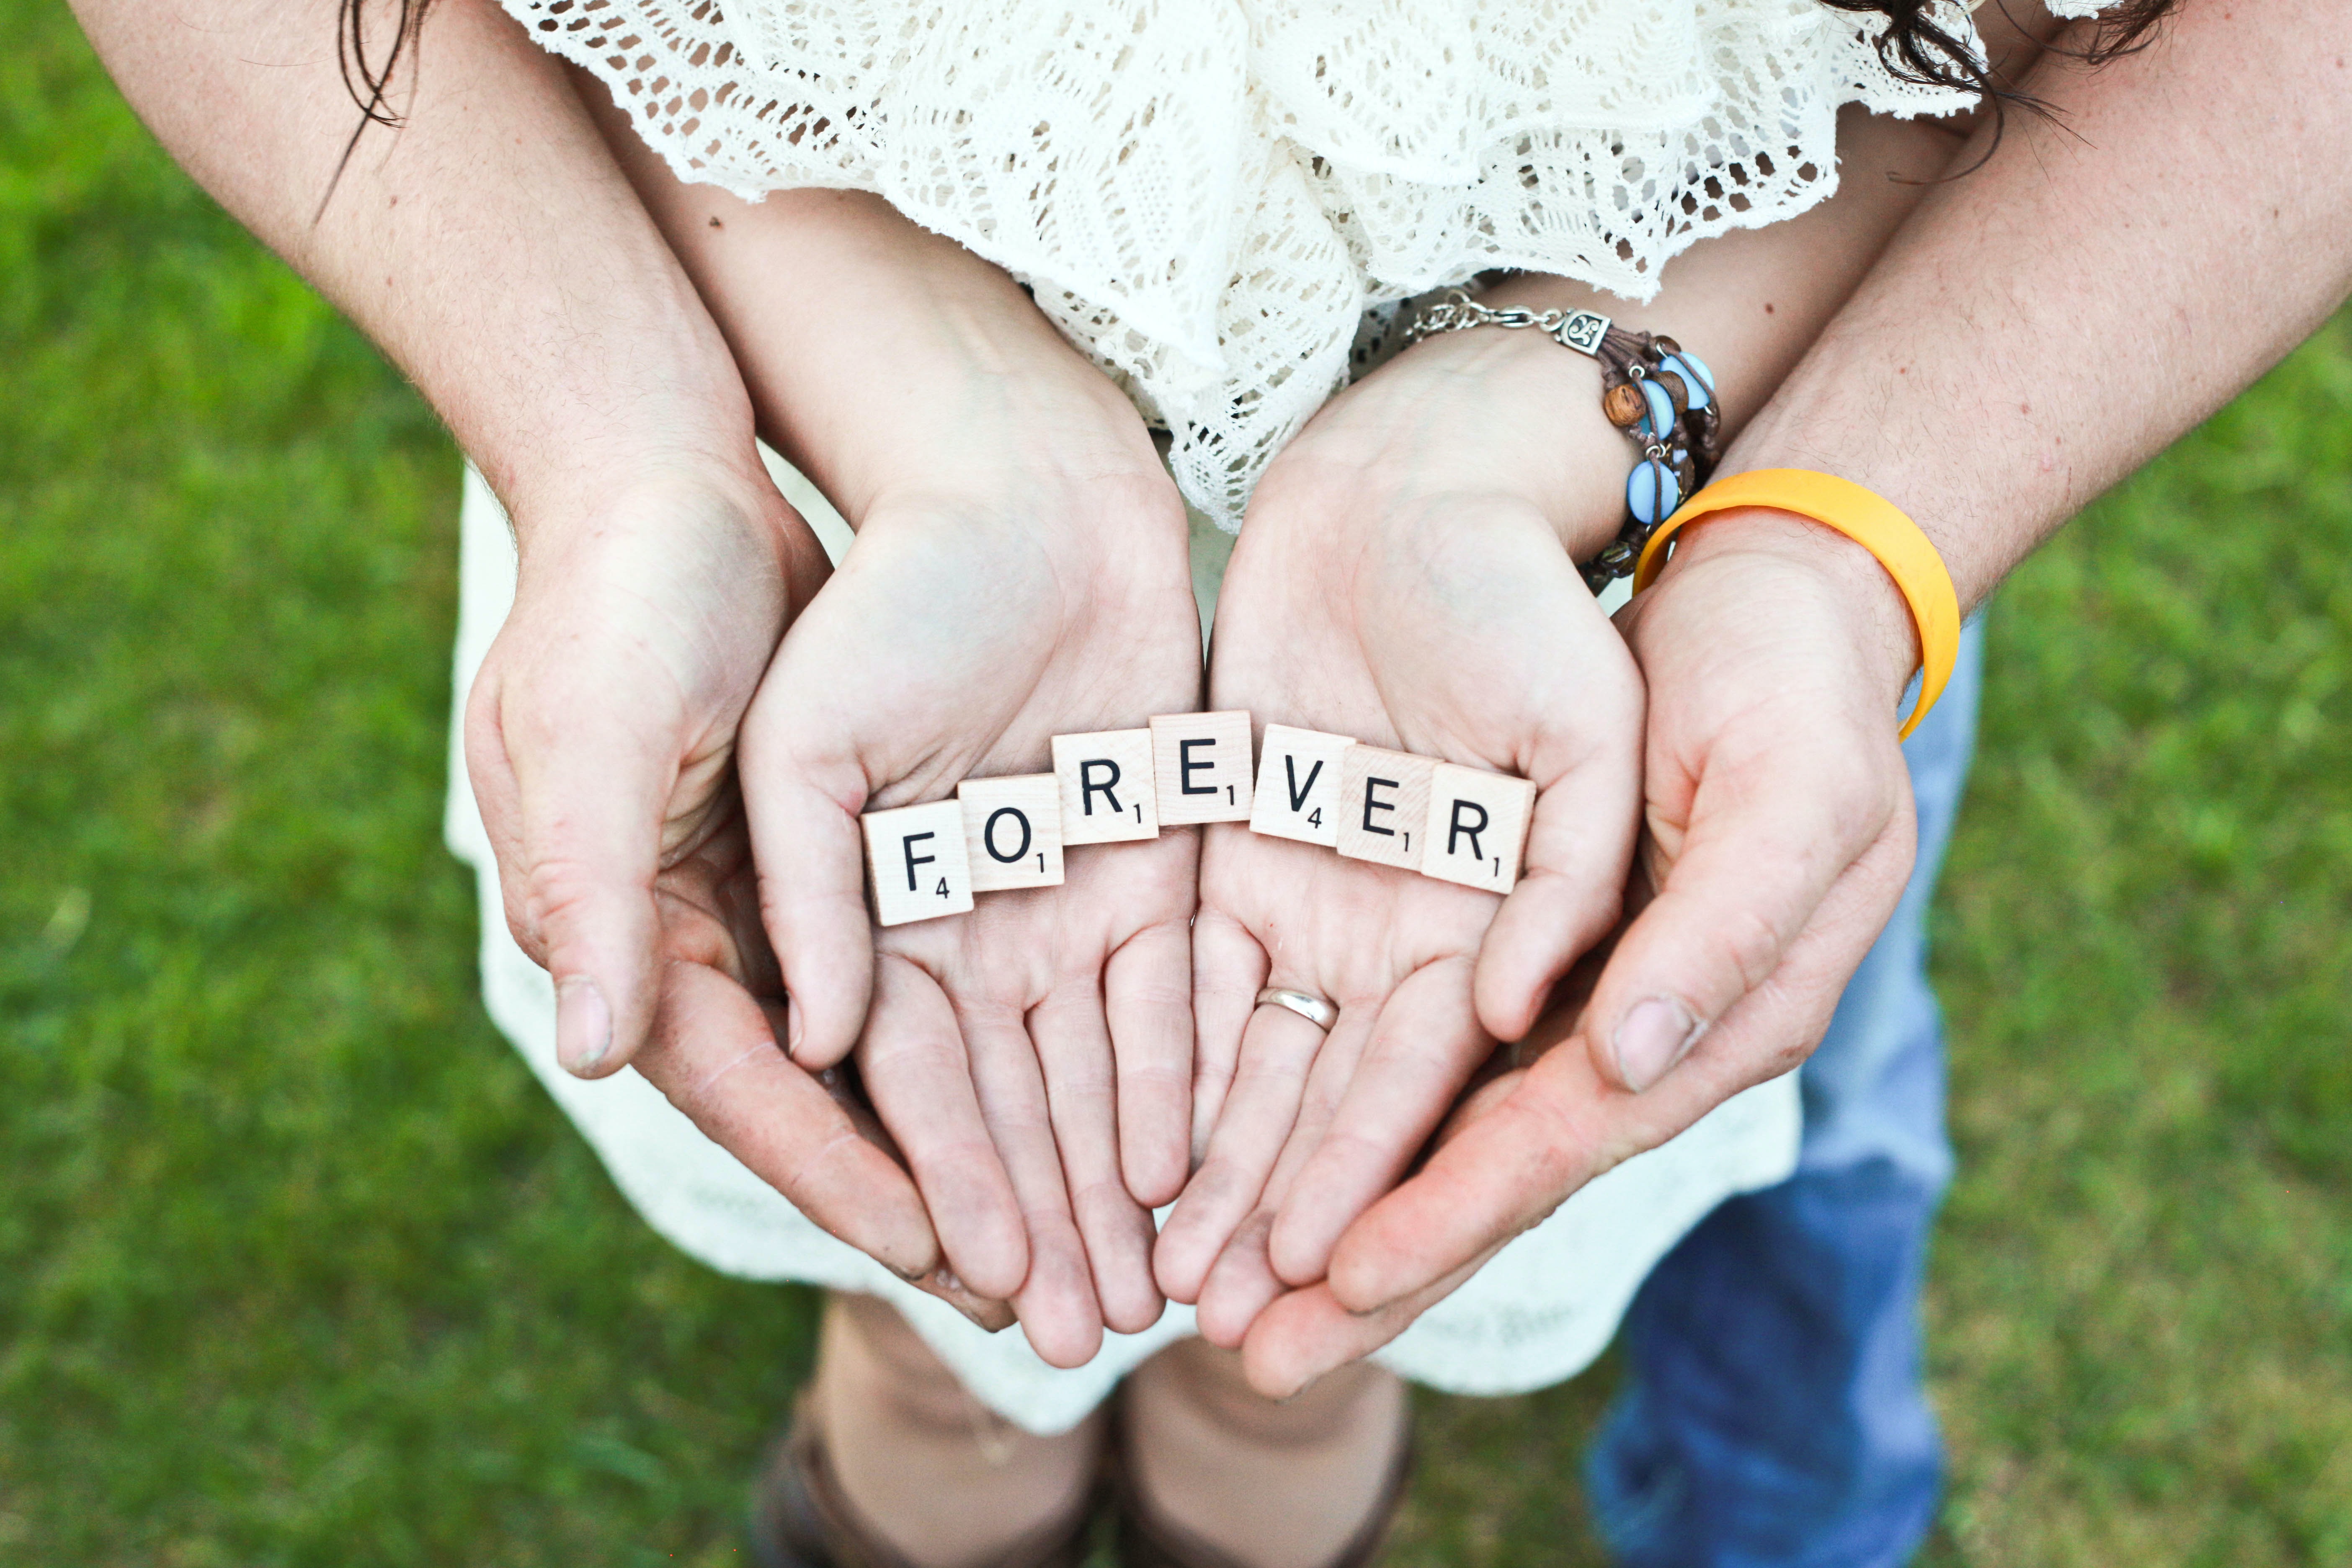 A photo of a woman holding scrabble letters with a man's hand underneath | Source: Unsplash